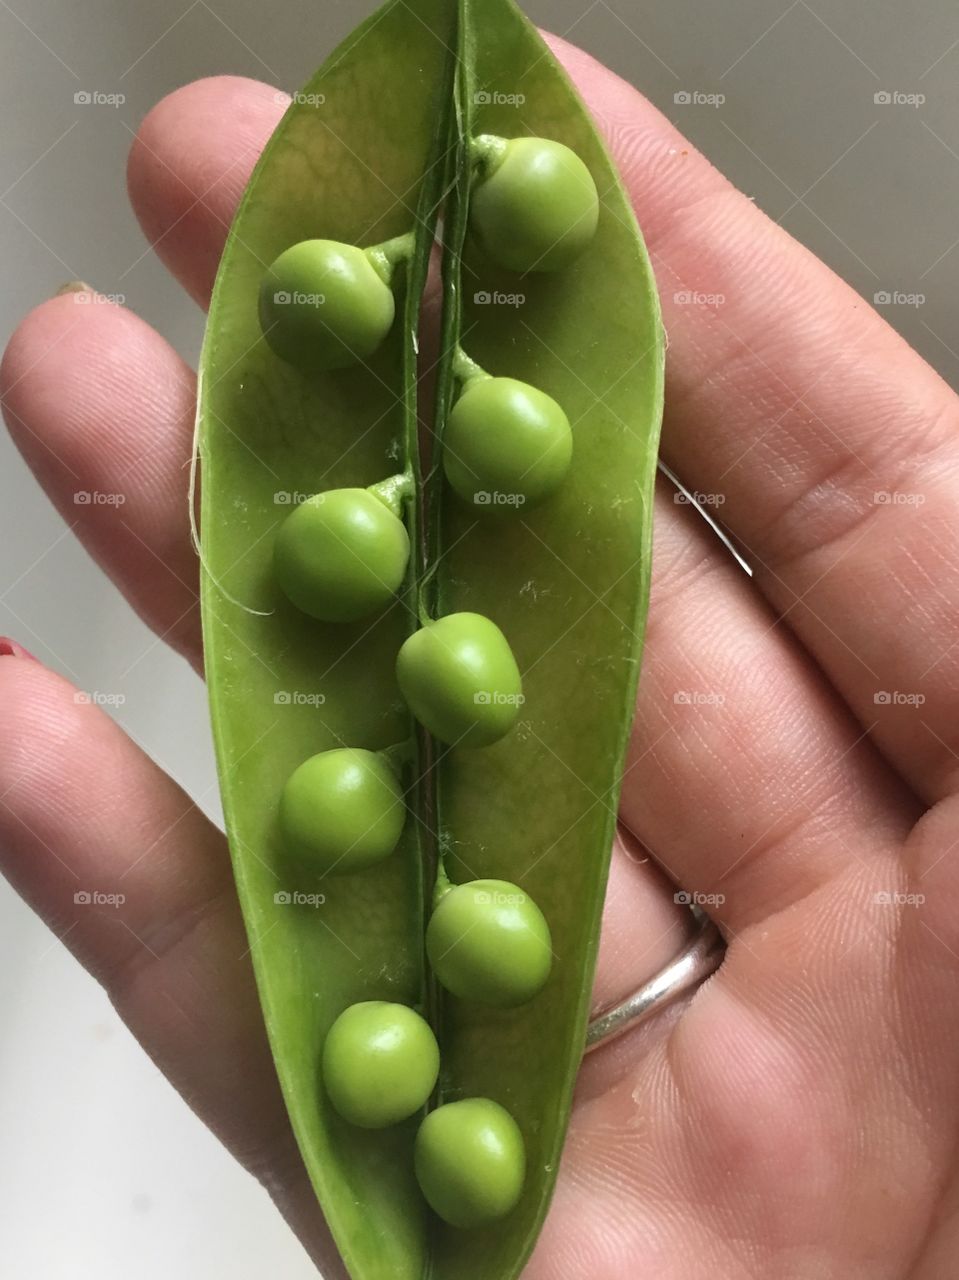 Delicious peas pulled from the garden